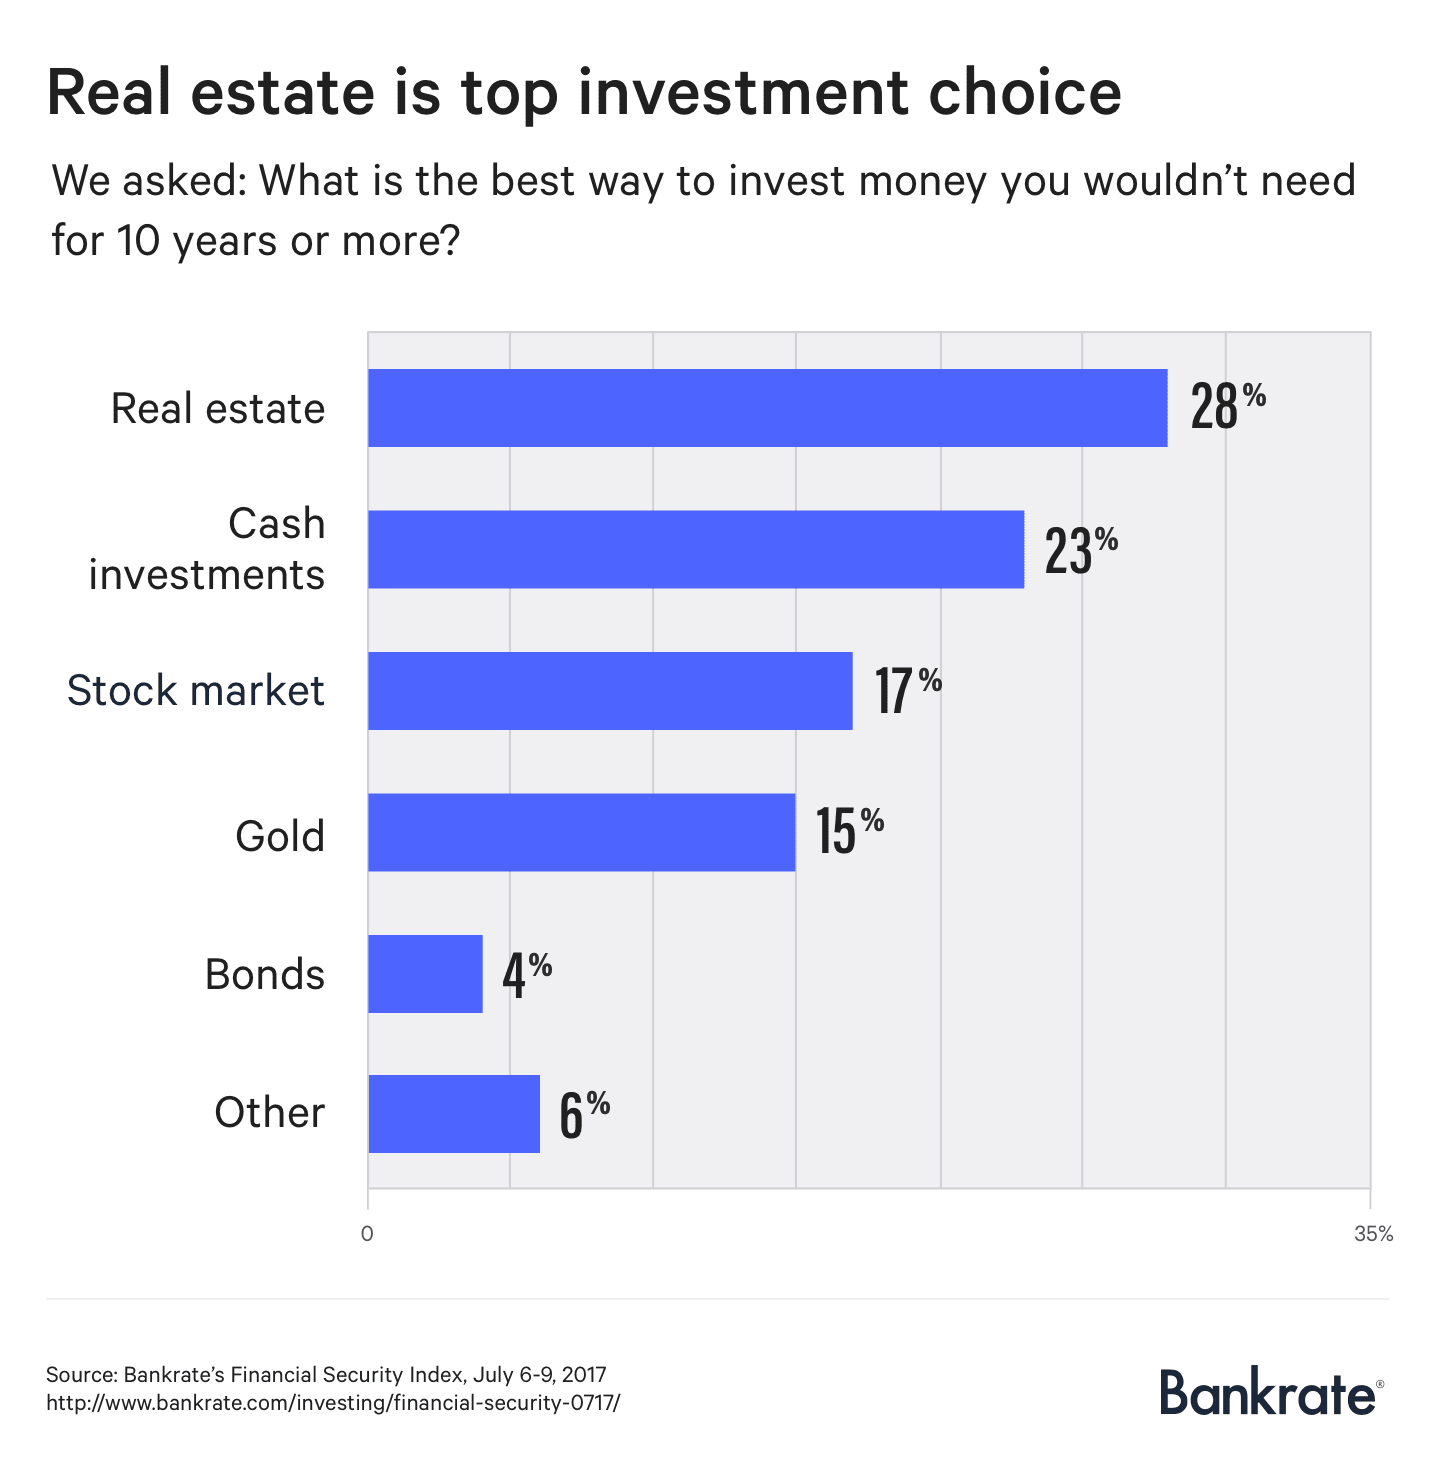 Americans are wrong about the best way to invest money